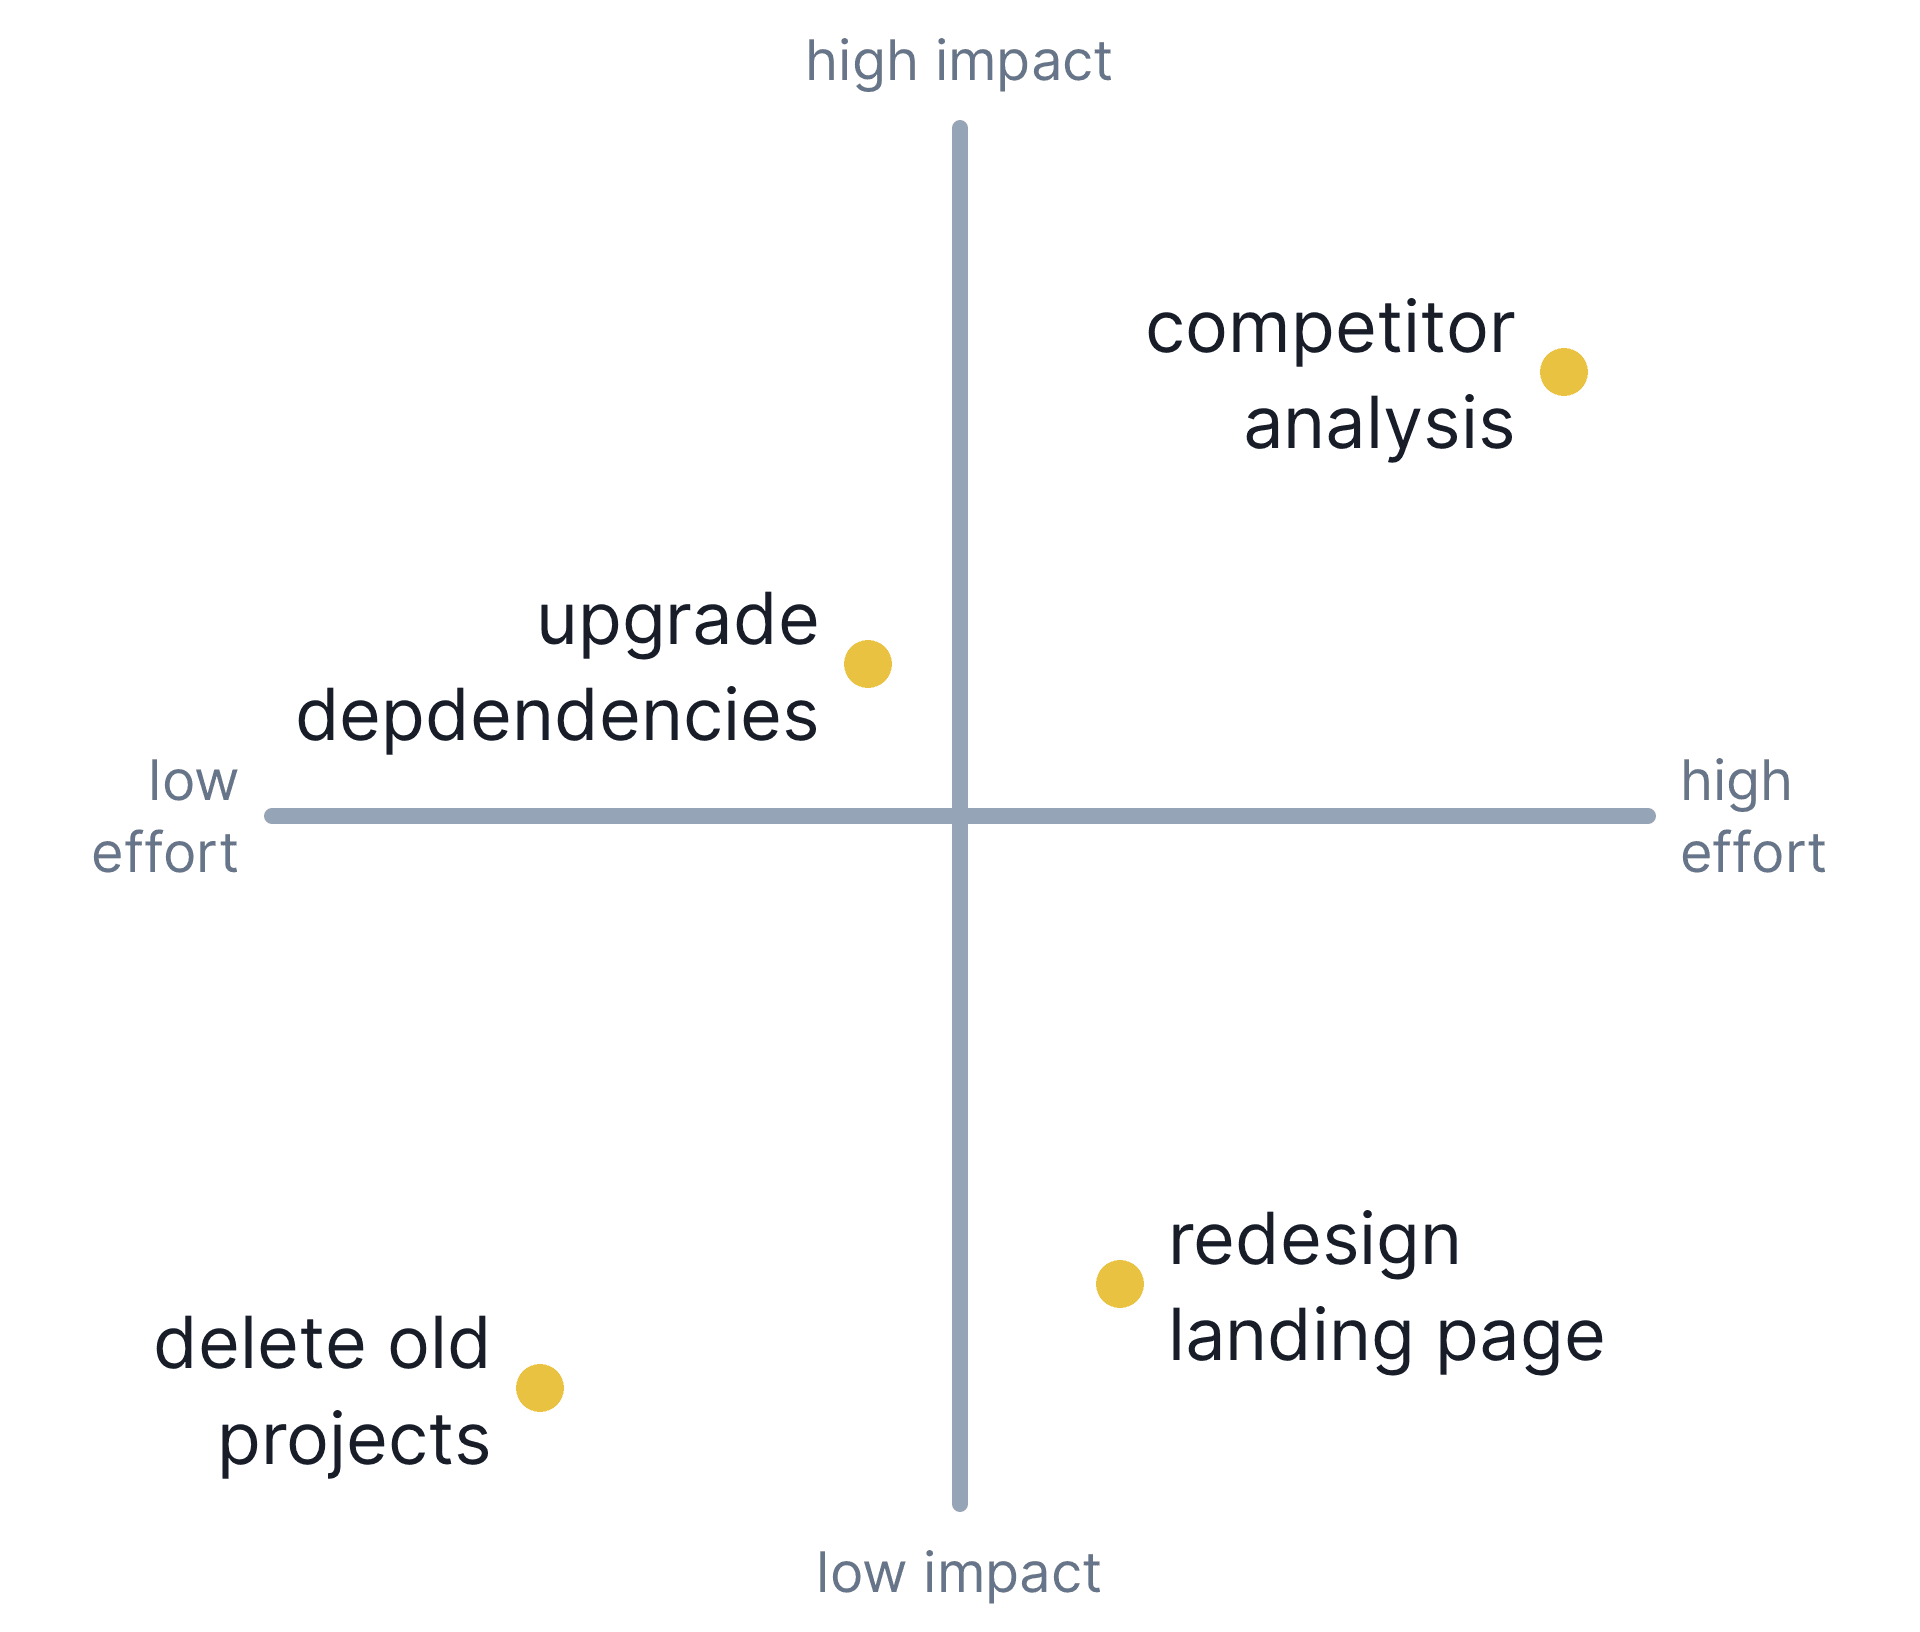 The projects on a two-dimensional chart, with the x-axis representing effort and the y-axis representing impact.